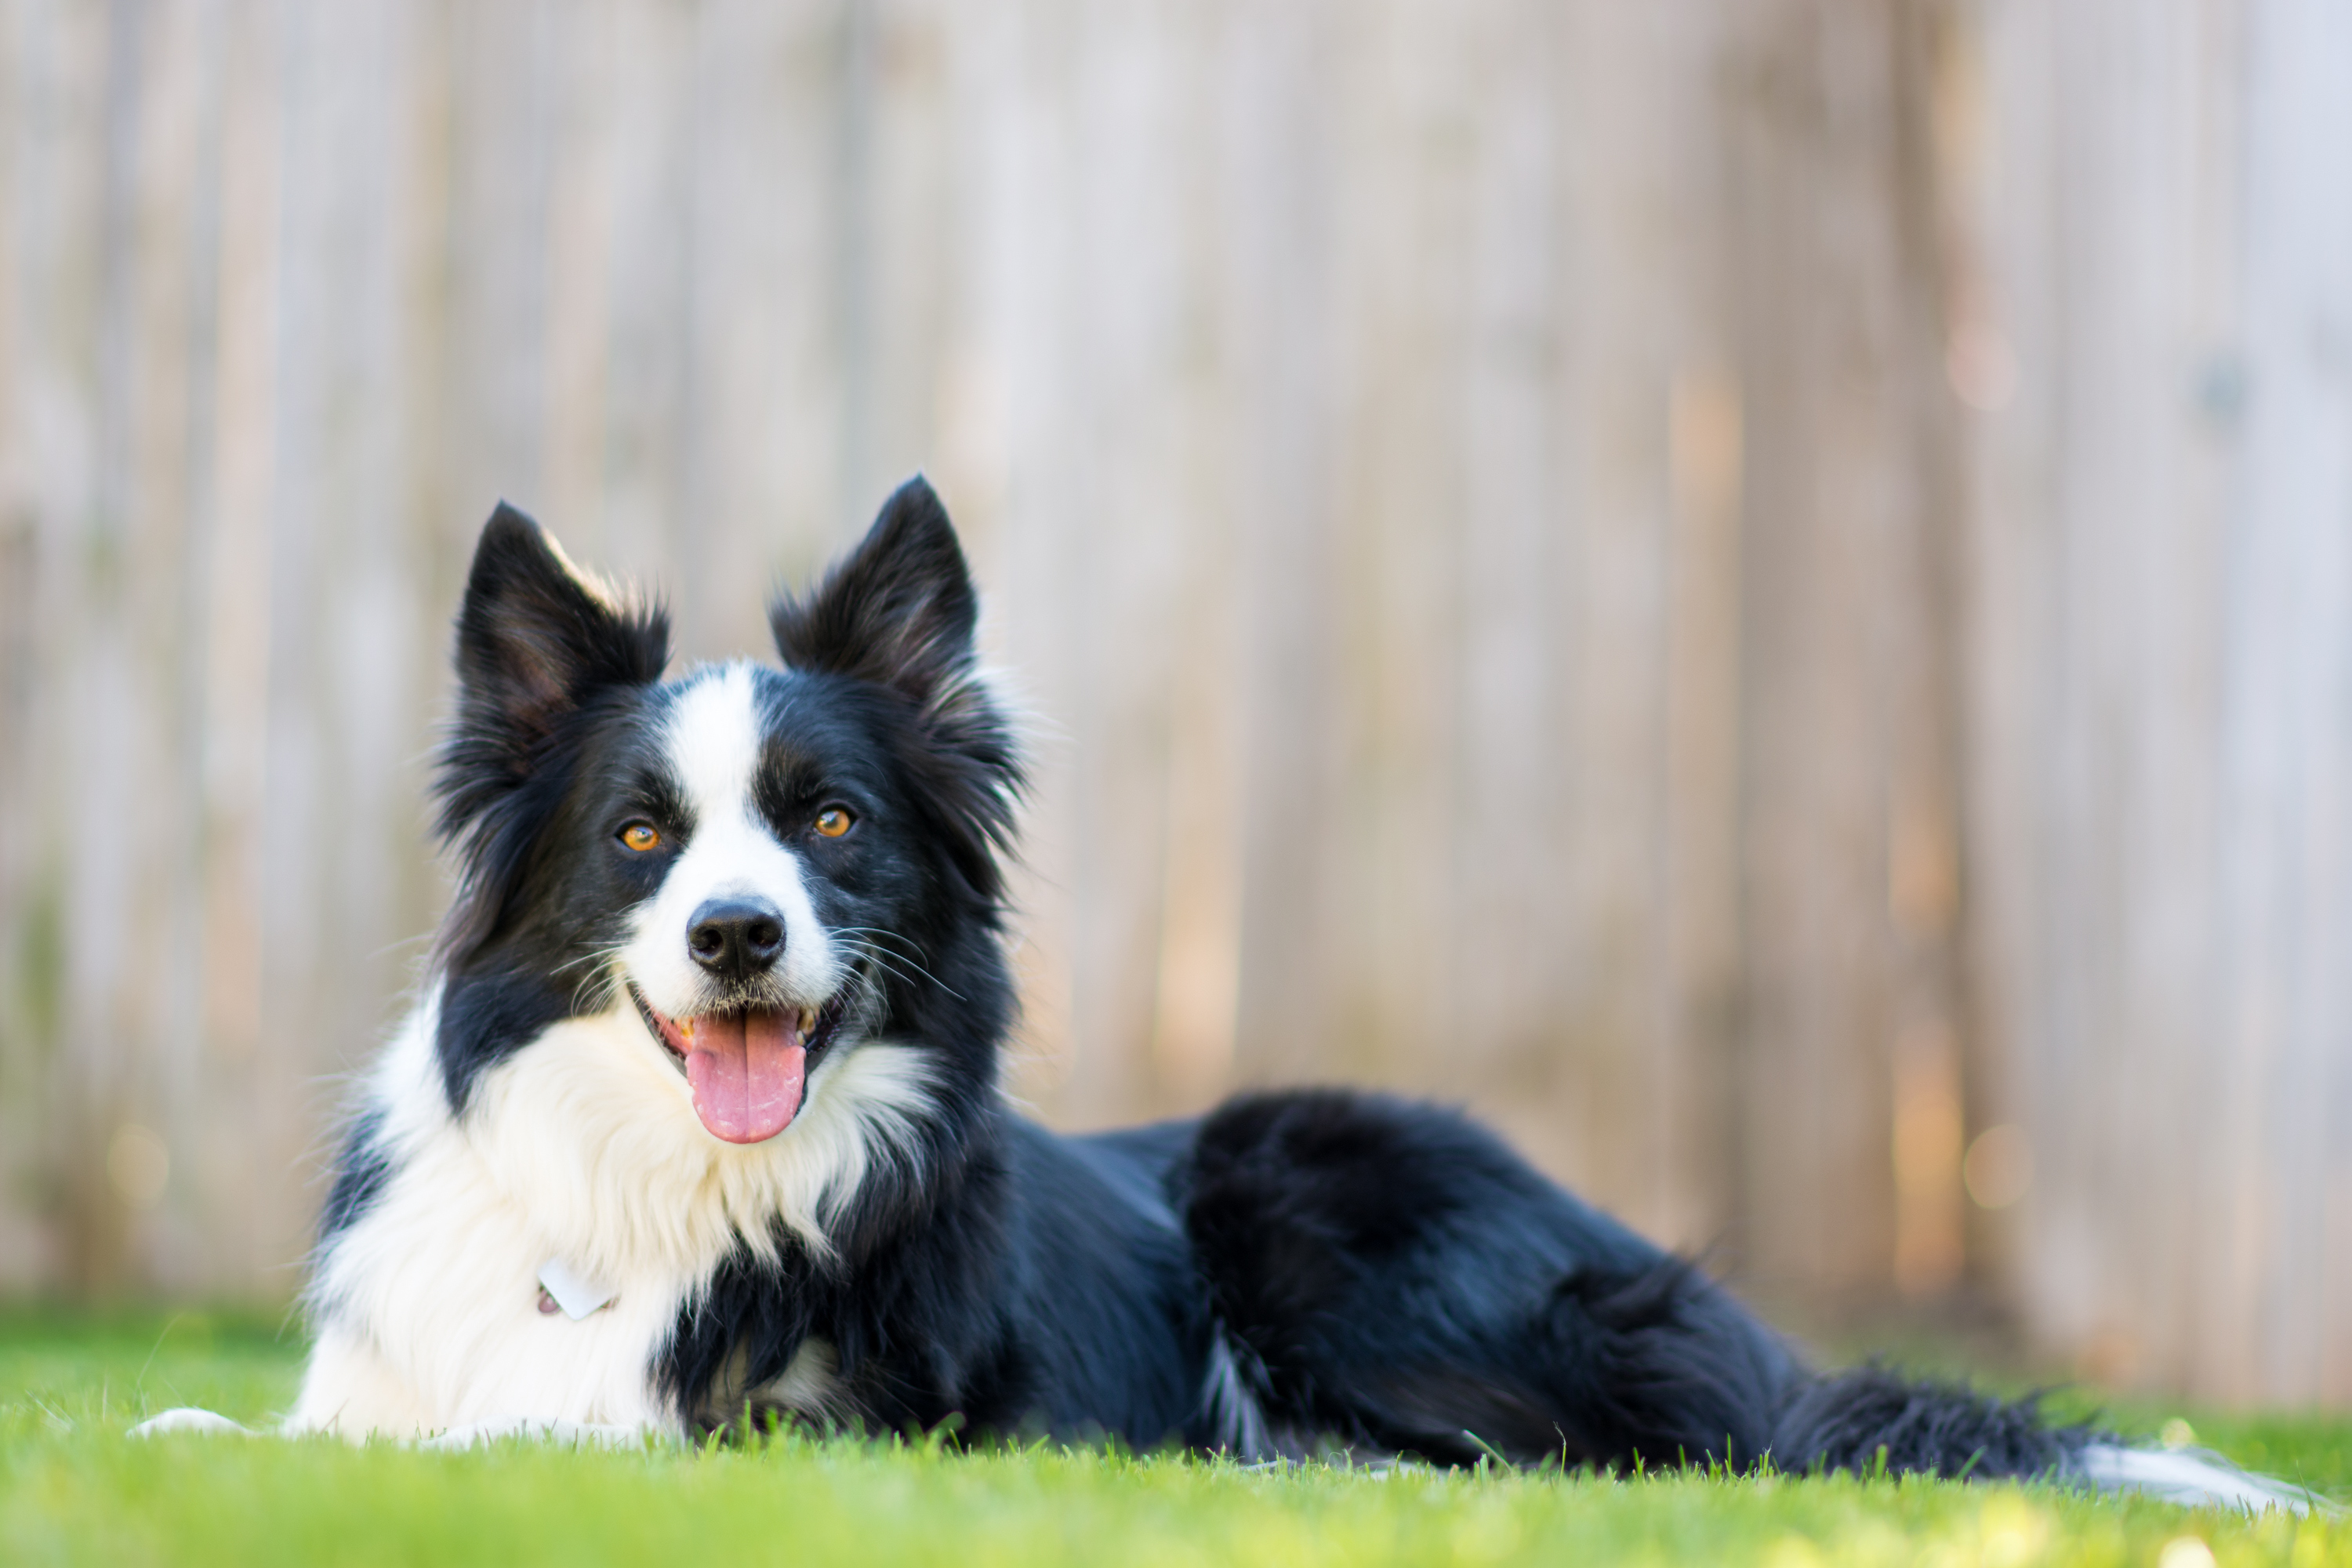 Border Collie with black and white markings lying outside in the grass